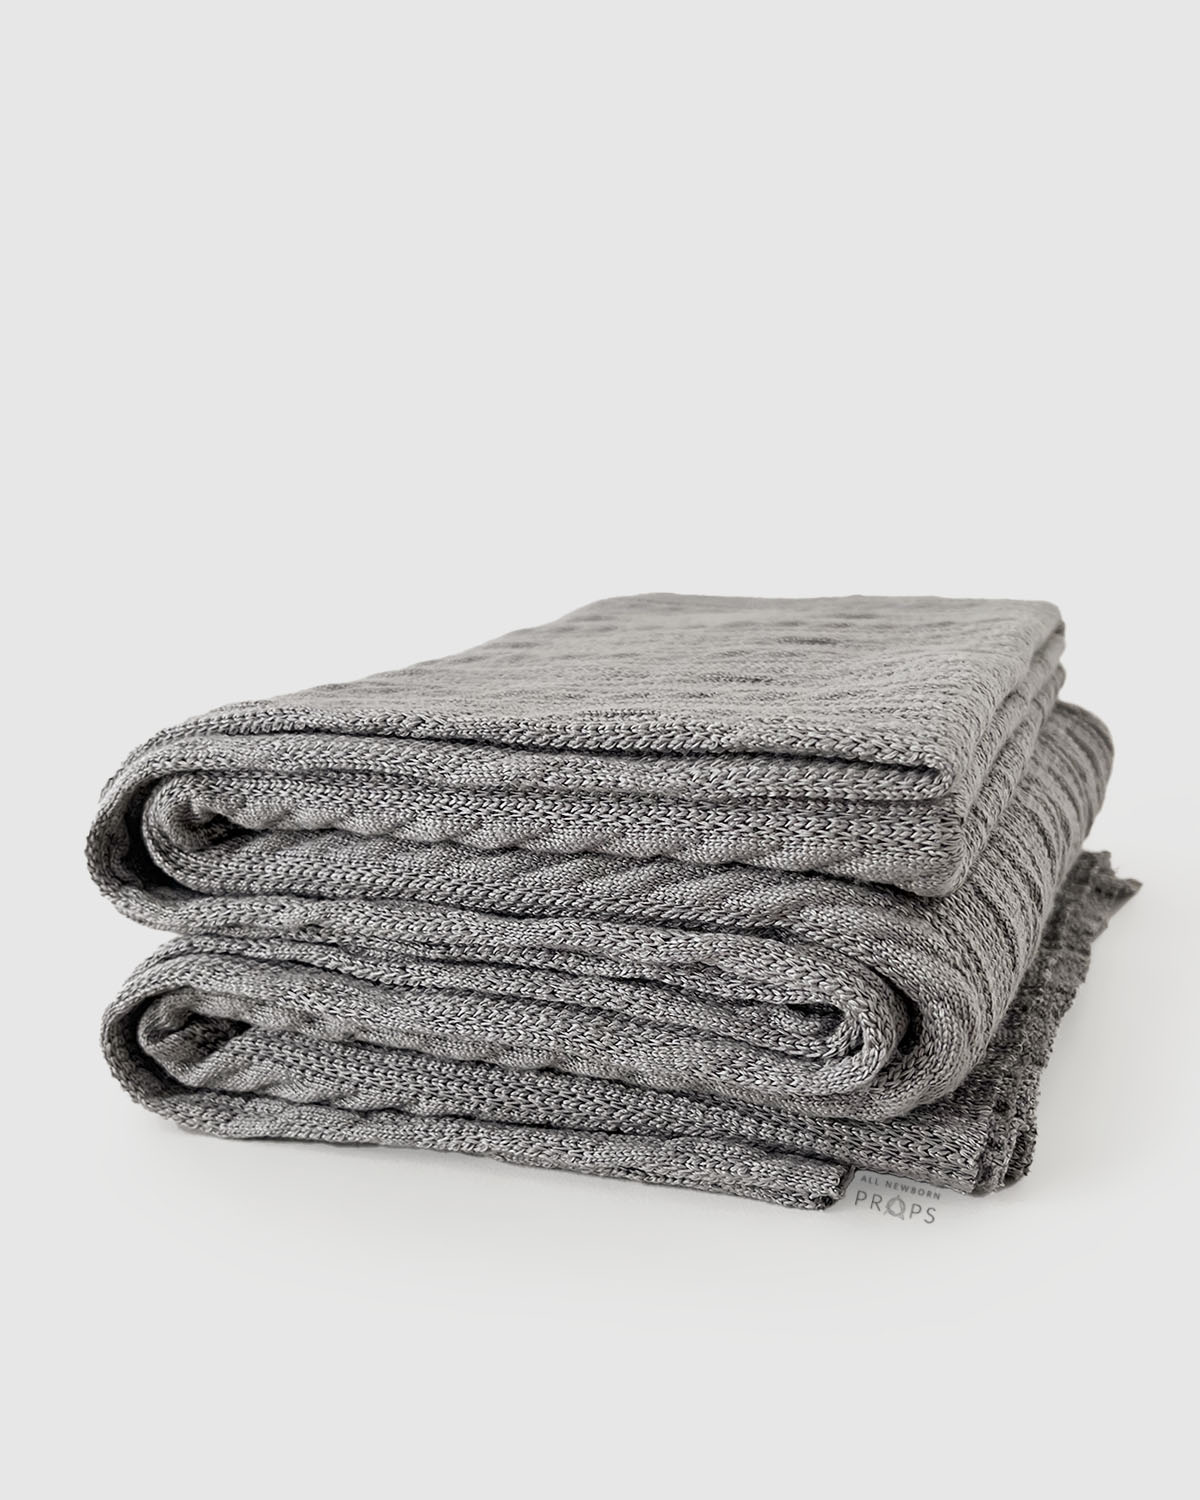 Newborn-Blankets-for-Photography-Session-boy-textured-thick-dark-grey-europe